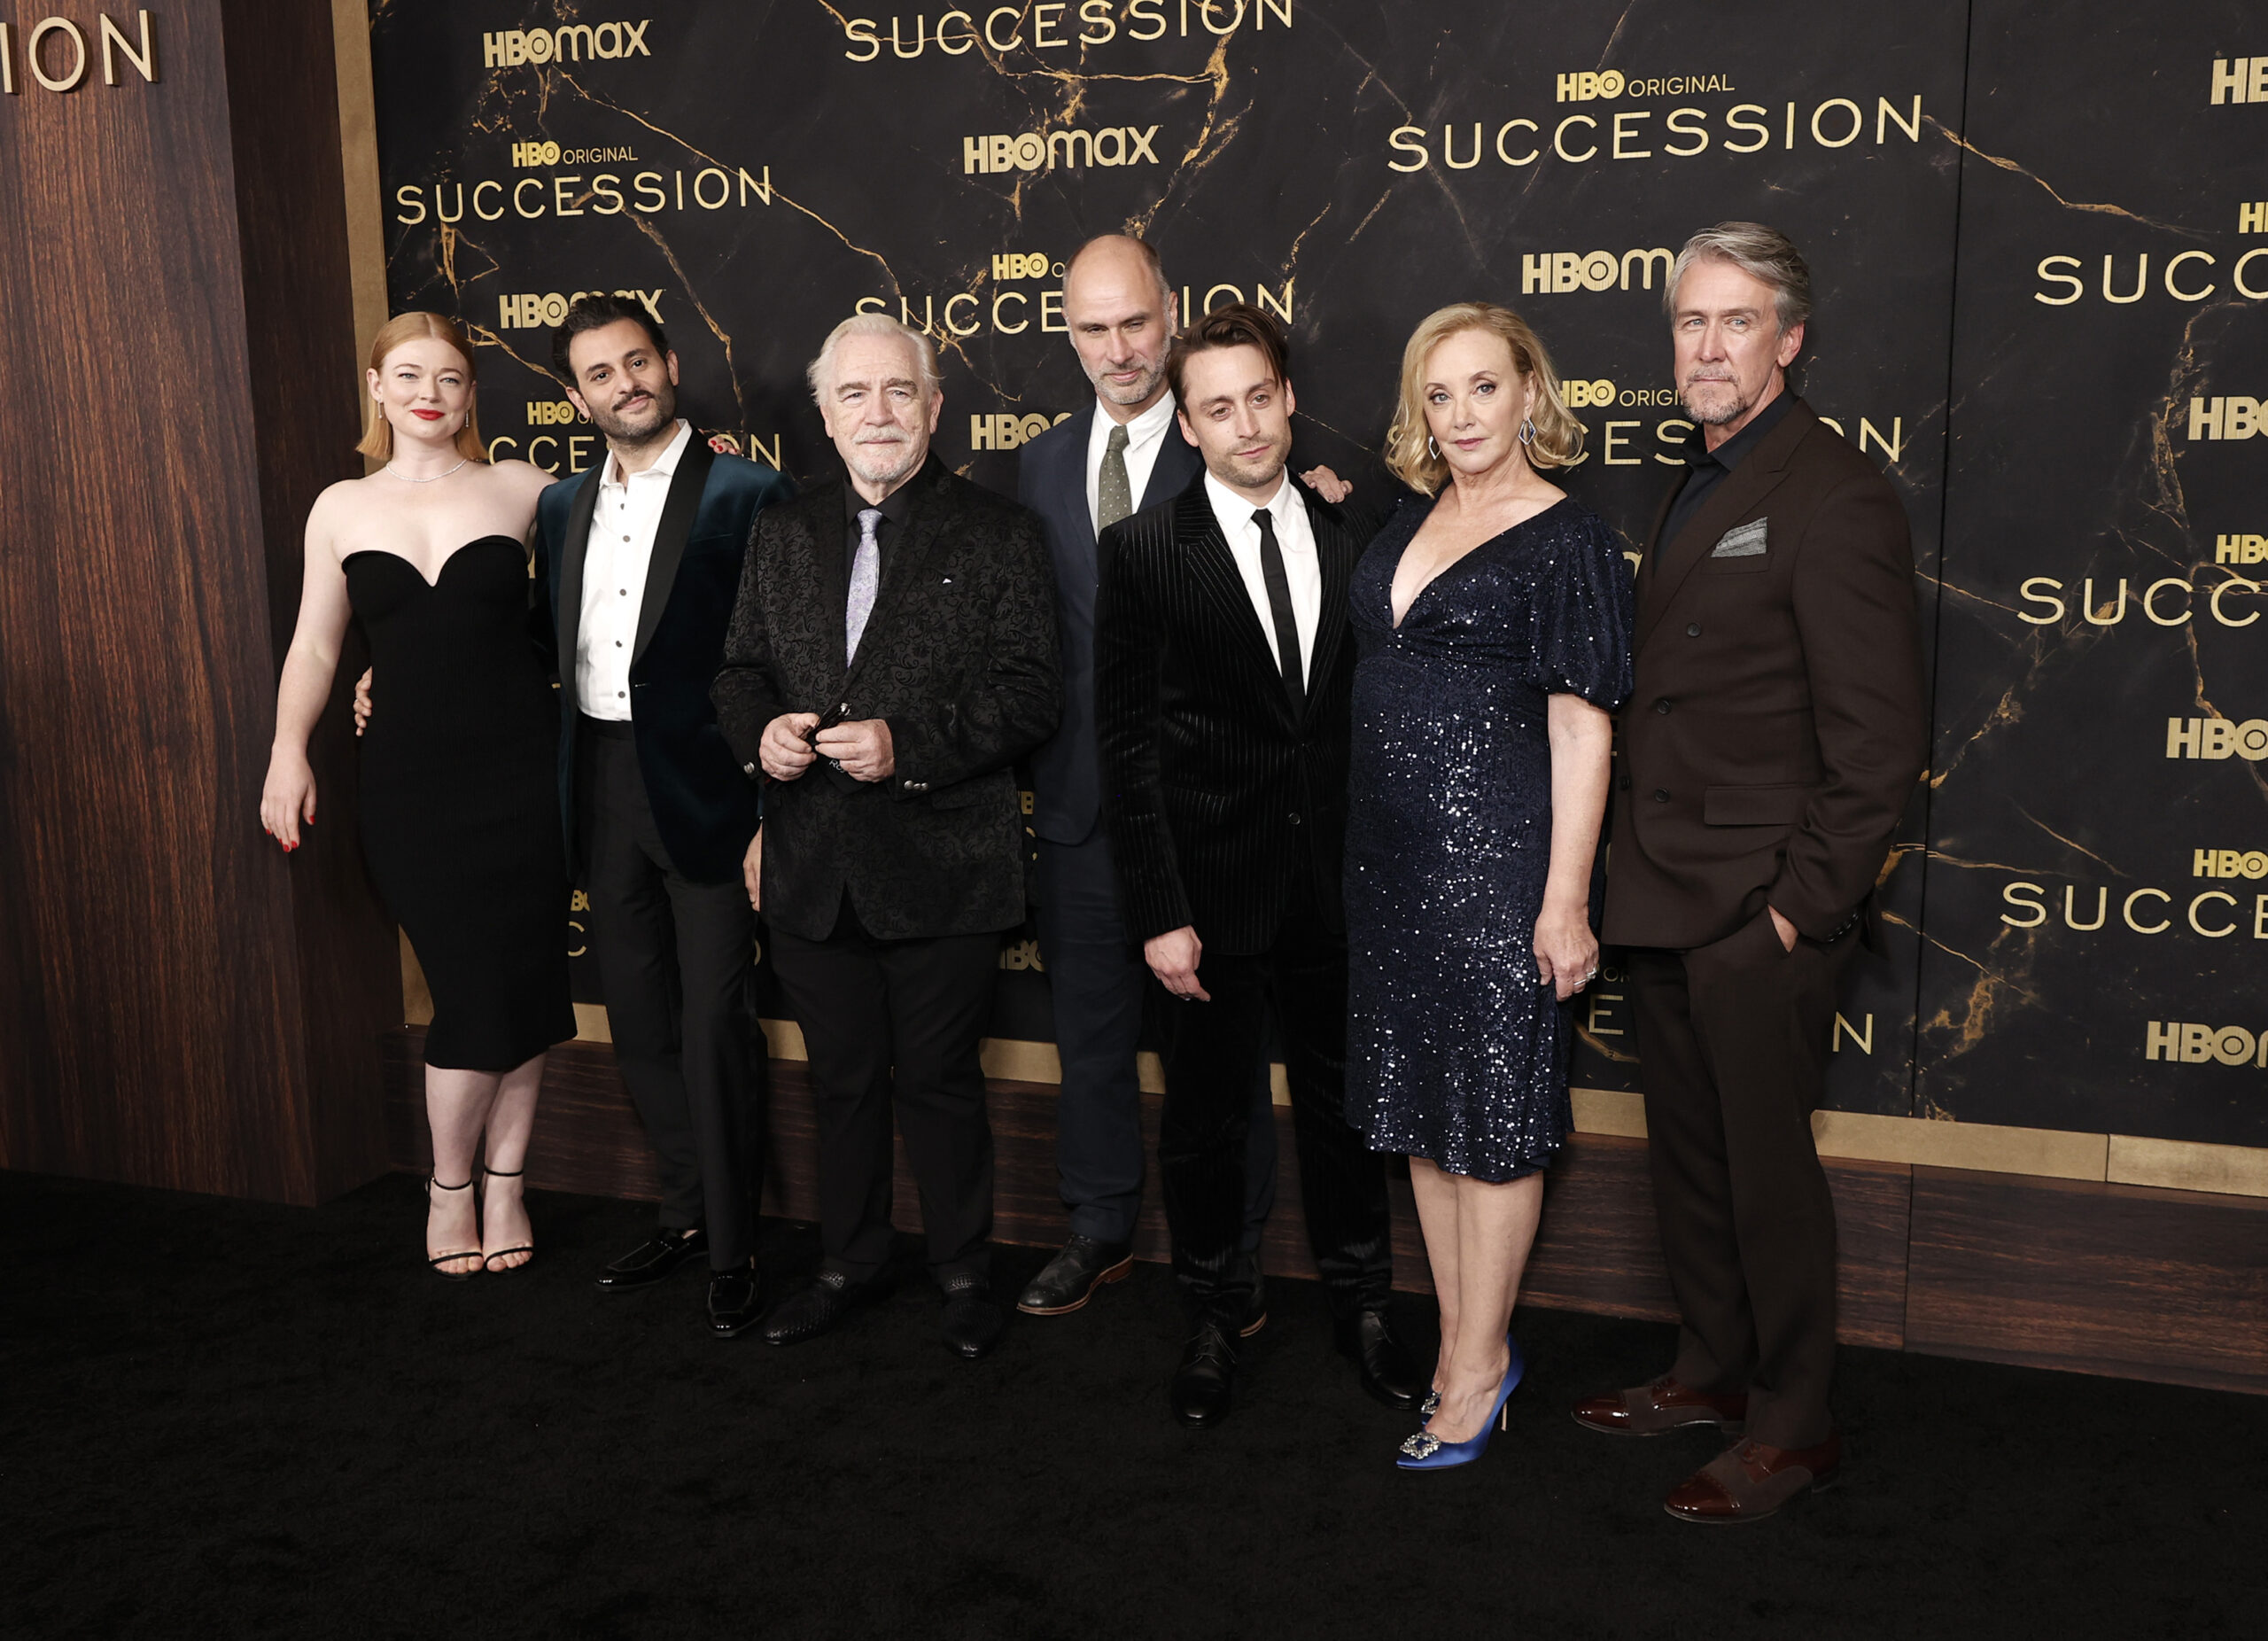 NEW YORK, NEW YORK - OCTOBER 12: Sarah Snook, Arian Moayed, Brian Cox, Jesse Armstrong, Kieran Culkin, J. Smith-Cameron and Alan Ruck attend the HBO's "Succession" Season 3 Premiere at American Museum of Natural History on October 12, 2021 in New York City. (Photo by Arturo Holmes/WireImage)